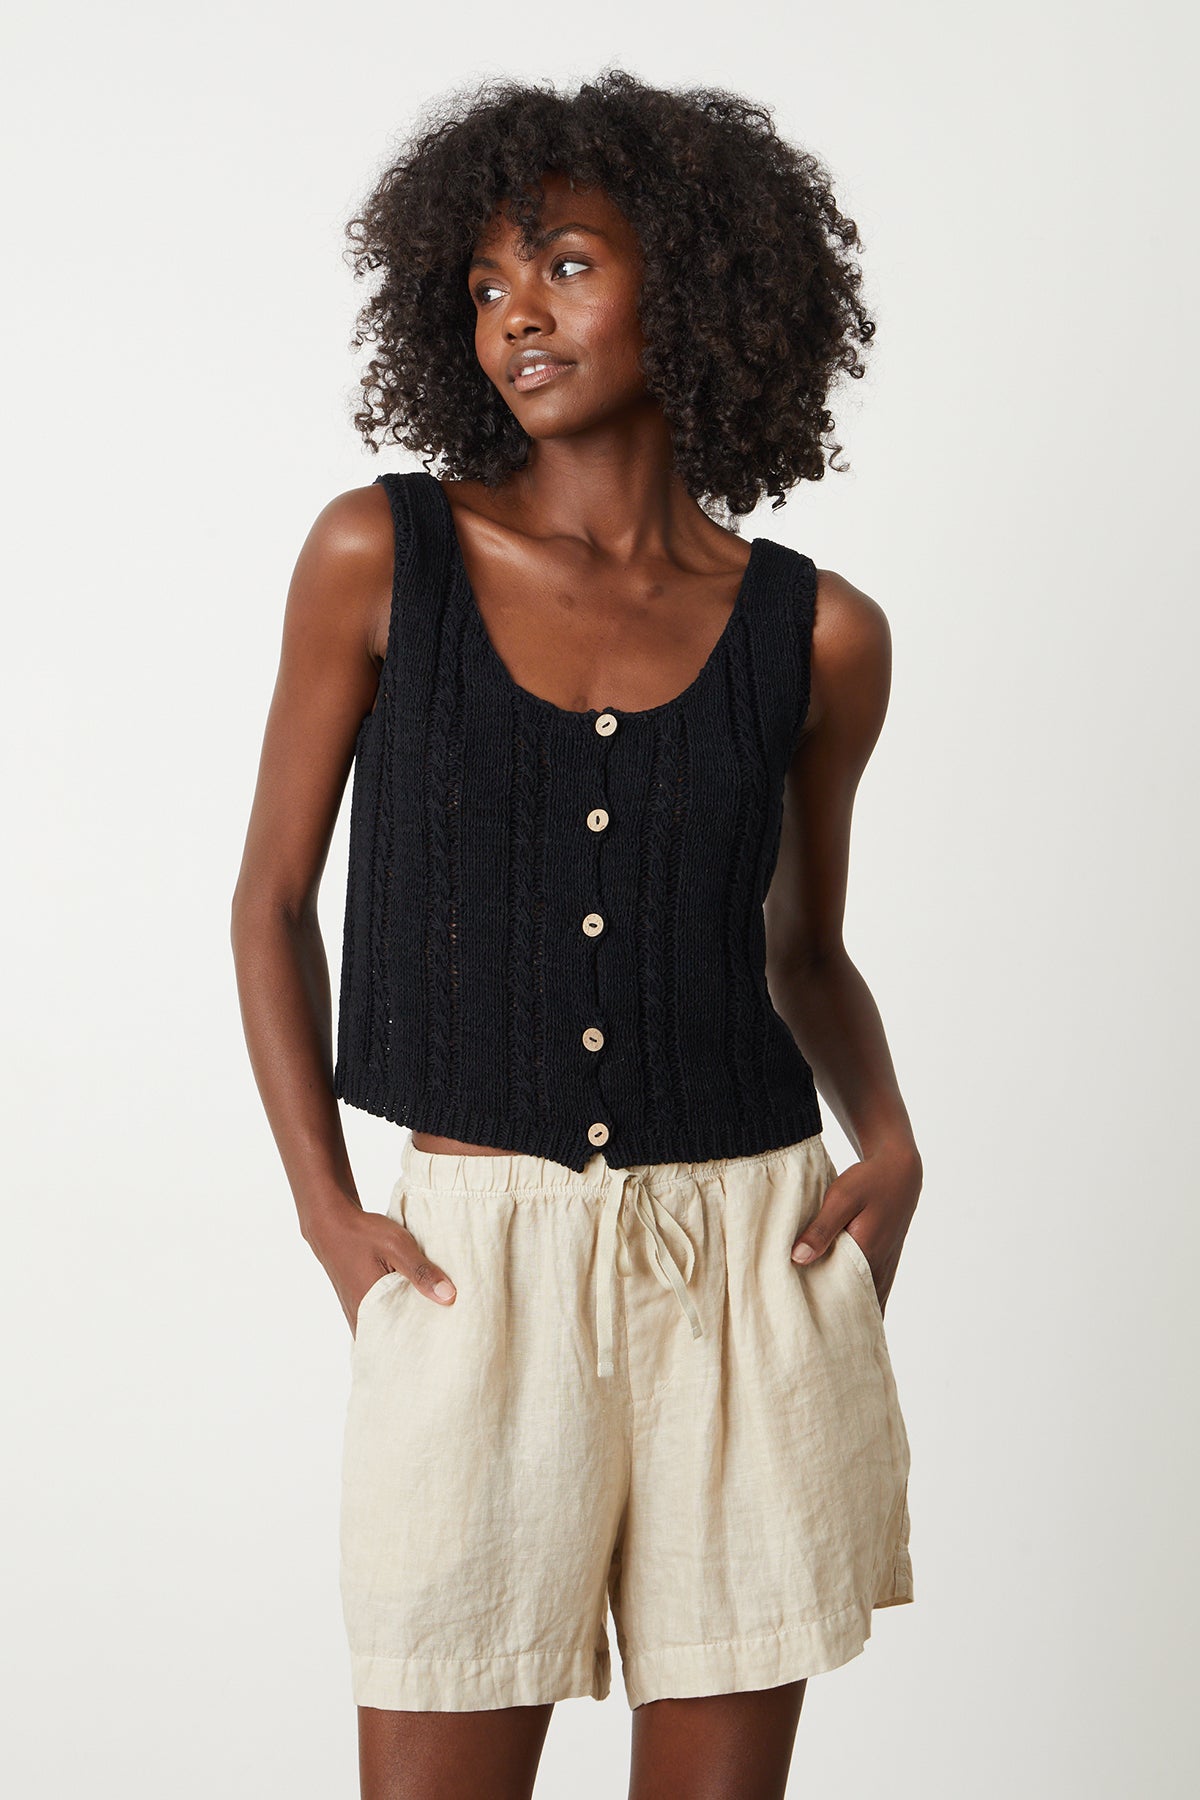   Layla Crochet Stitch Tank Top in black with Tammy short in sand front, model hands in pockets 